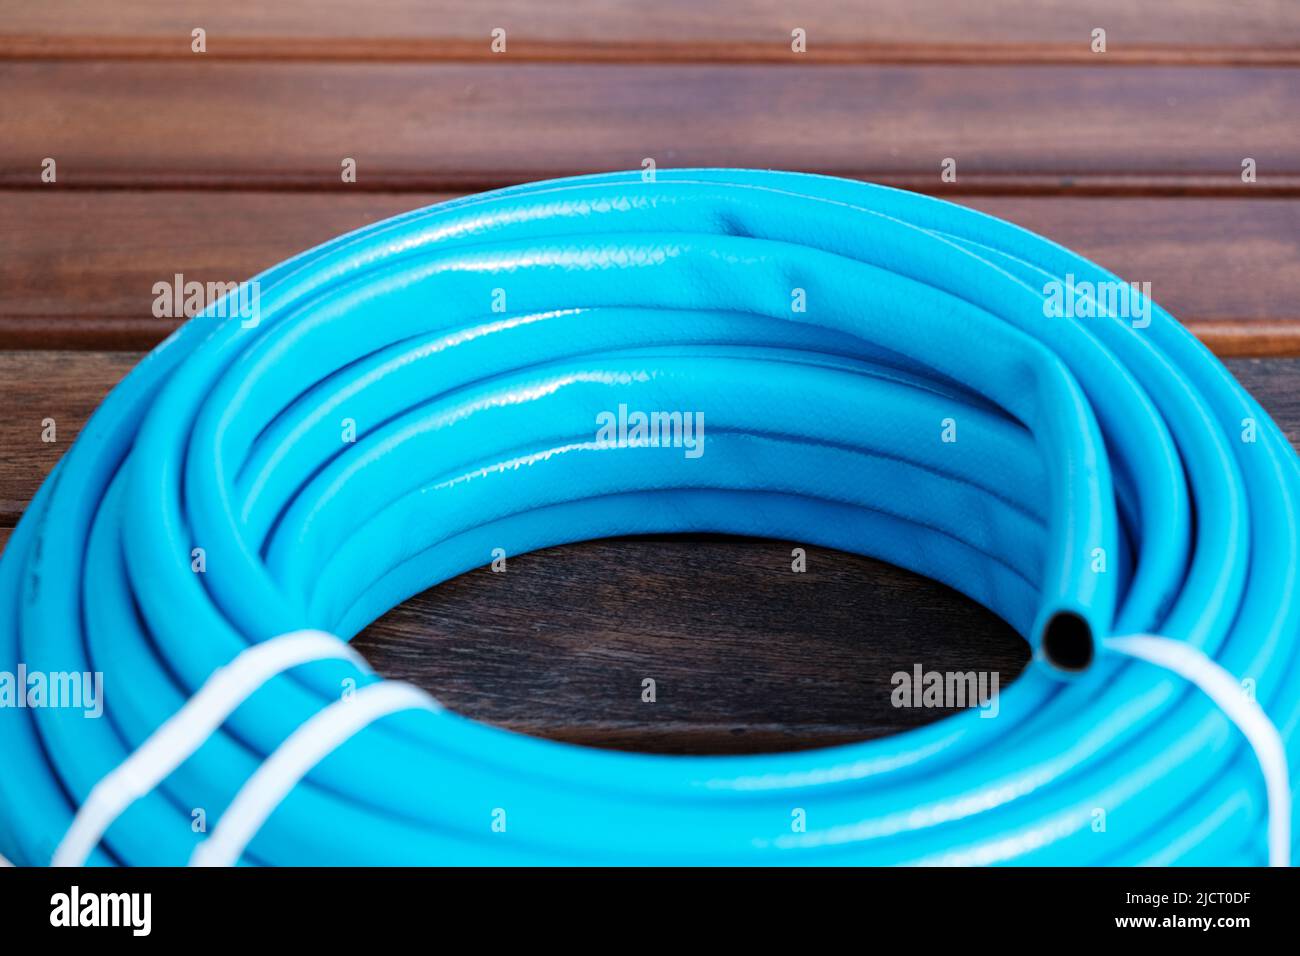 Detail of the rubber material of a new blue hose, built with recycled material. Stock Photo